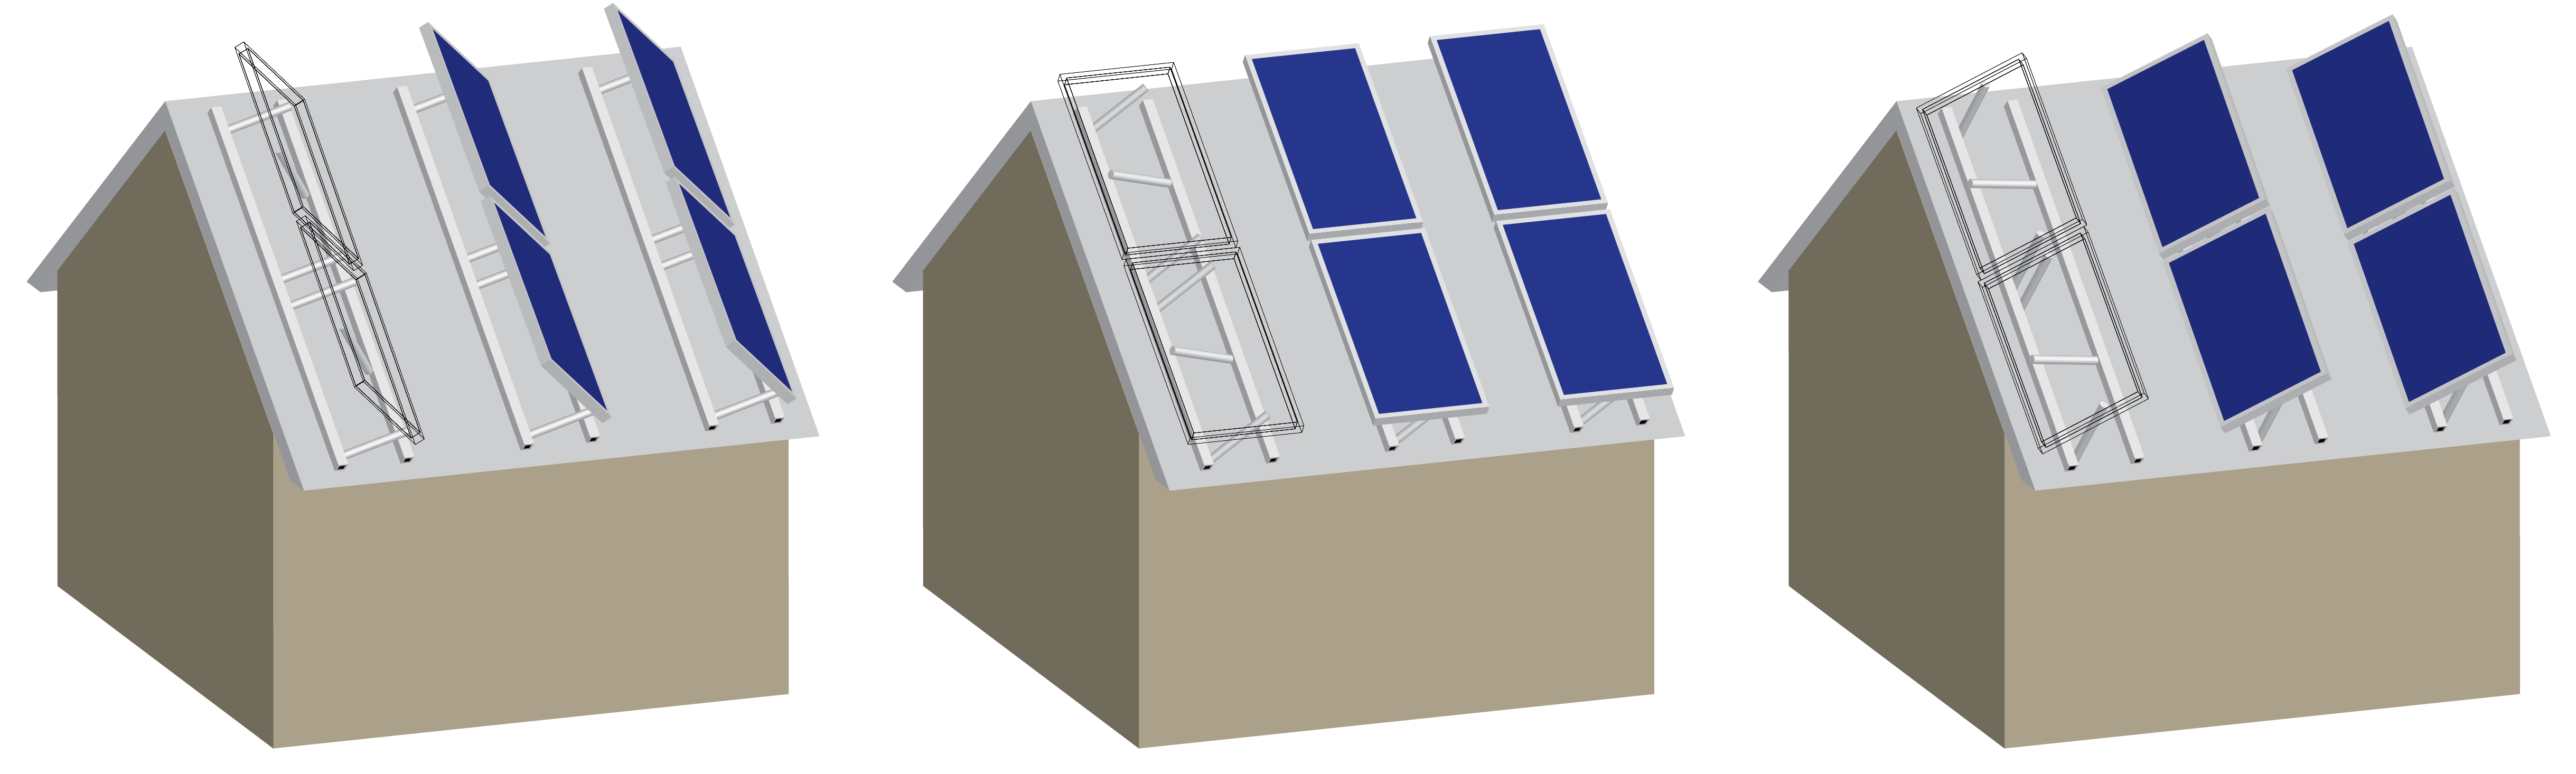 Cartoon schematic of inclined rooftop solar tracker